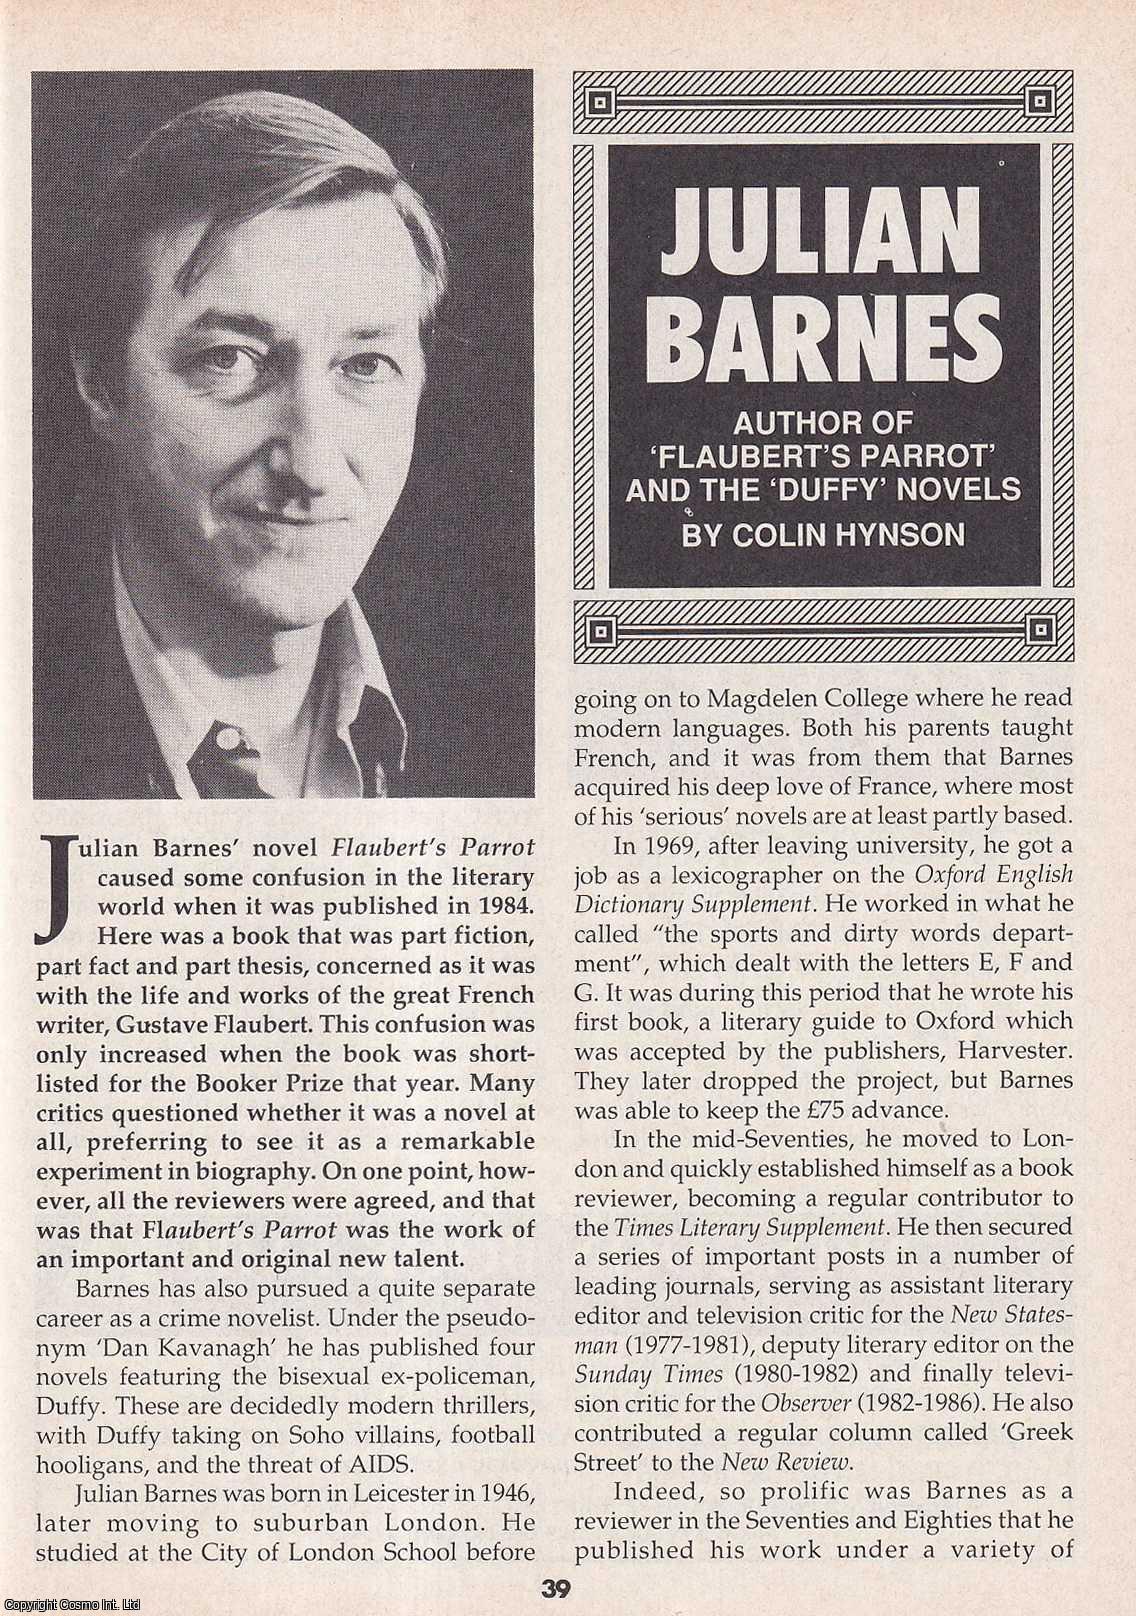 Colin Hynson - Julian Barnes. This is an original article separated from an issue of The Book & Magazine Collector publication.